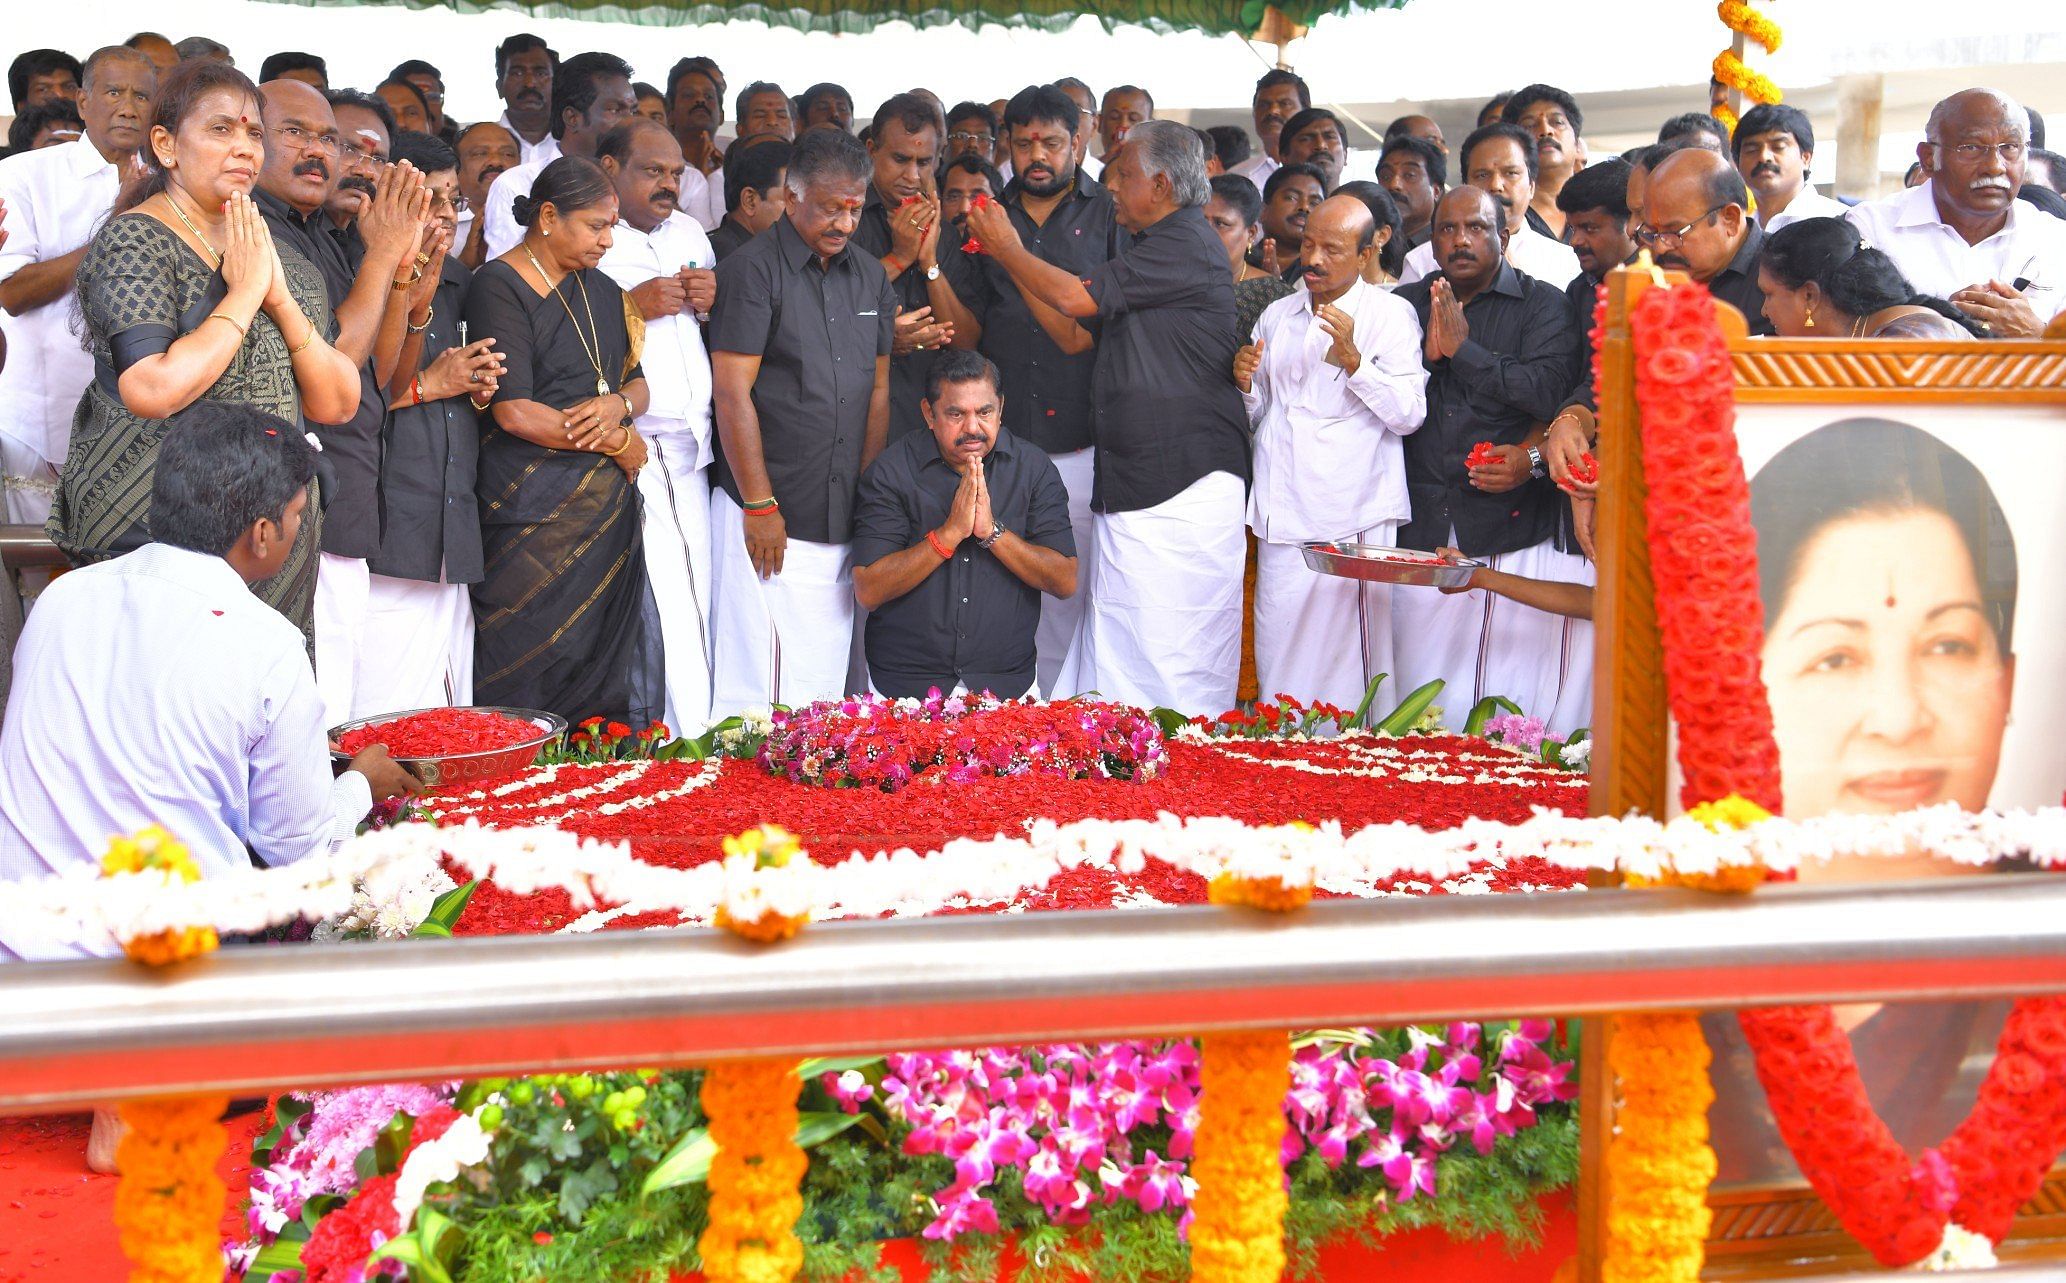 Clad in black shirts, Panneerselvam and Palaniswami laid a wreath at the memorial even as thousands of cadres chanted slogans praising Jayalalithaa. (Twitter Photo/@AIADMKOfficial)